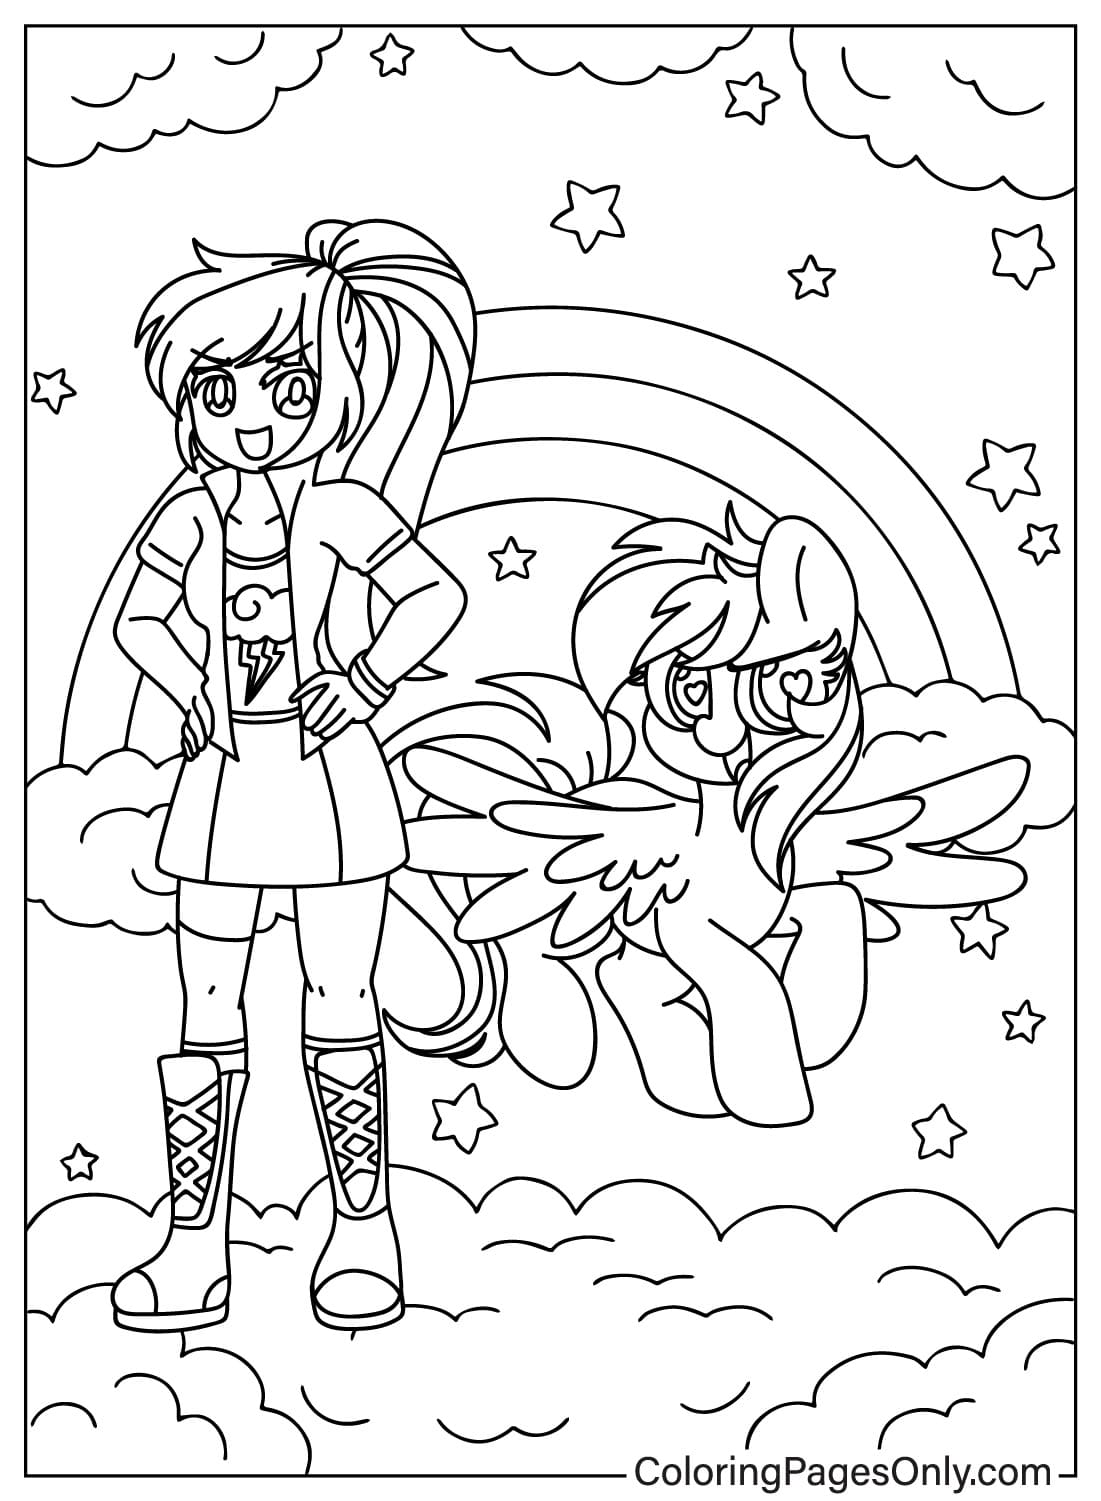 Pictures Rainbow Dash Coloring Page